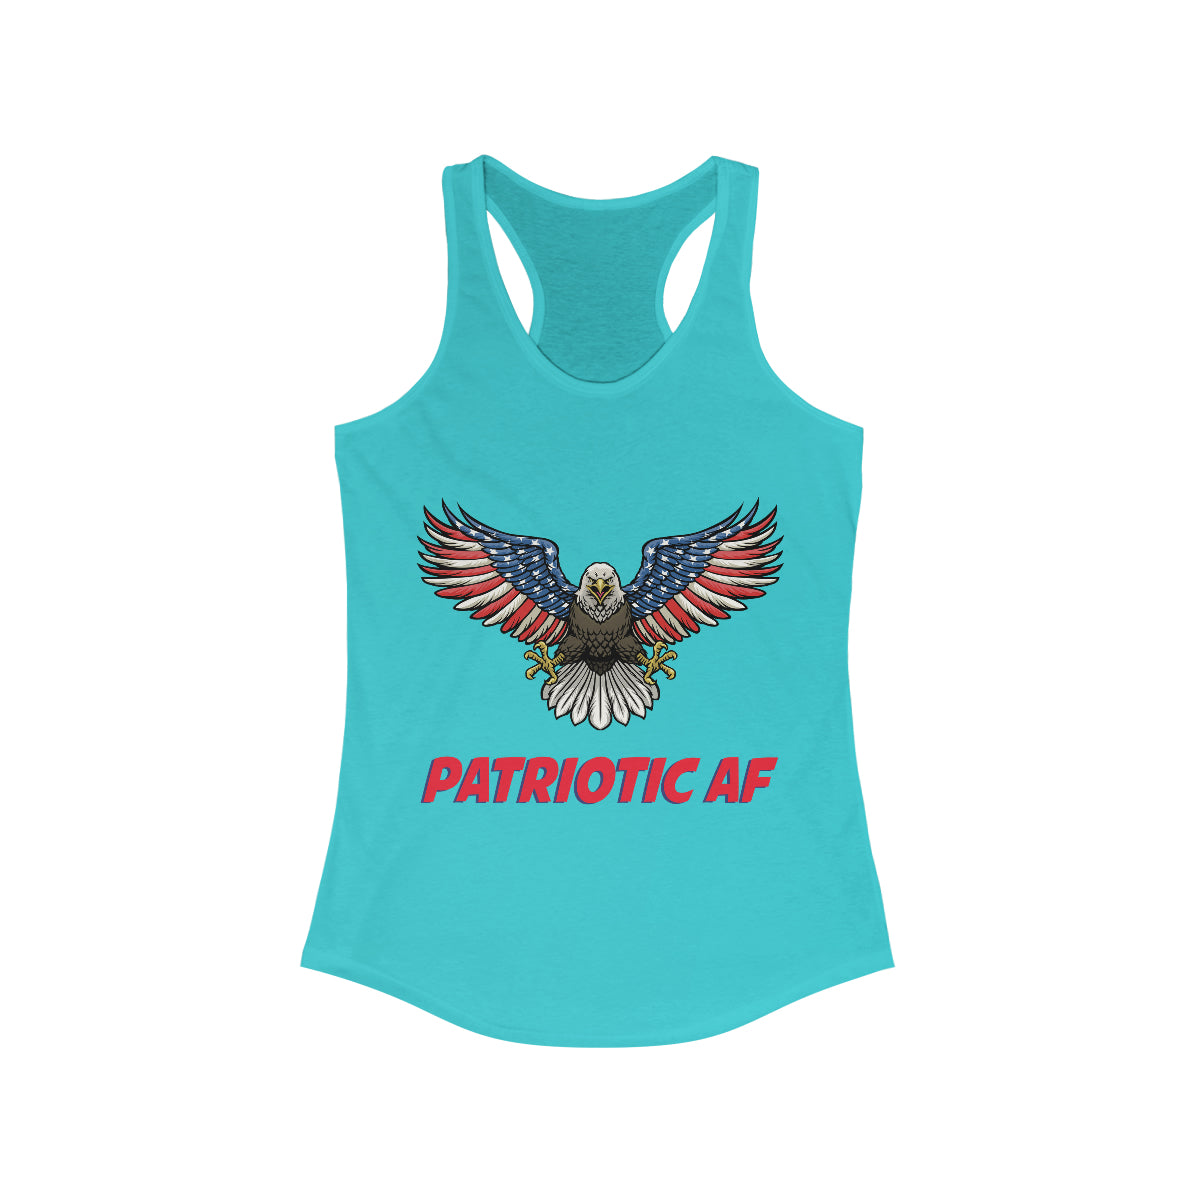 Patriotic AF with American Eagle 2 | Women's Racerback Tank - Rise of The New Media